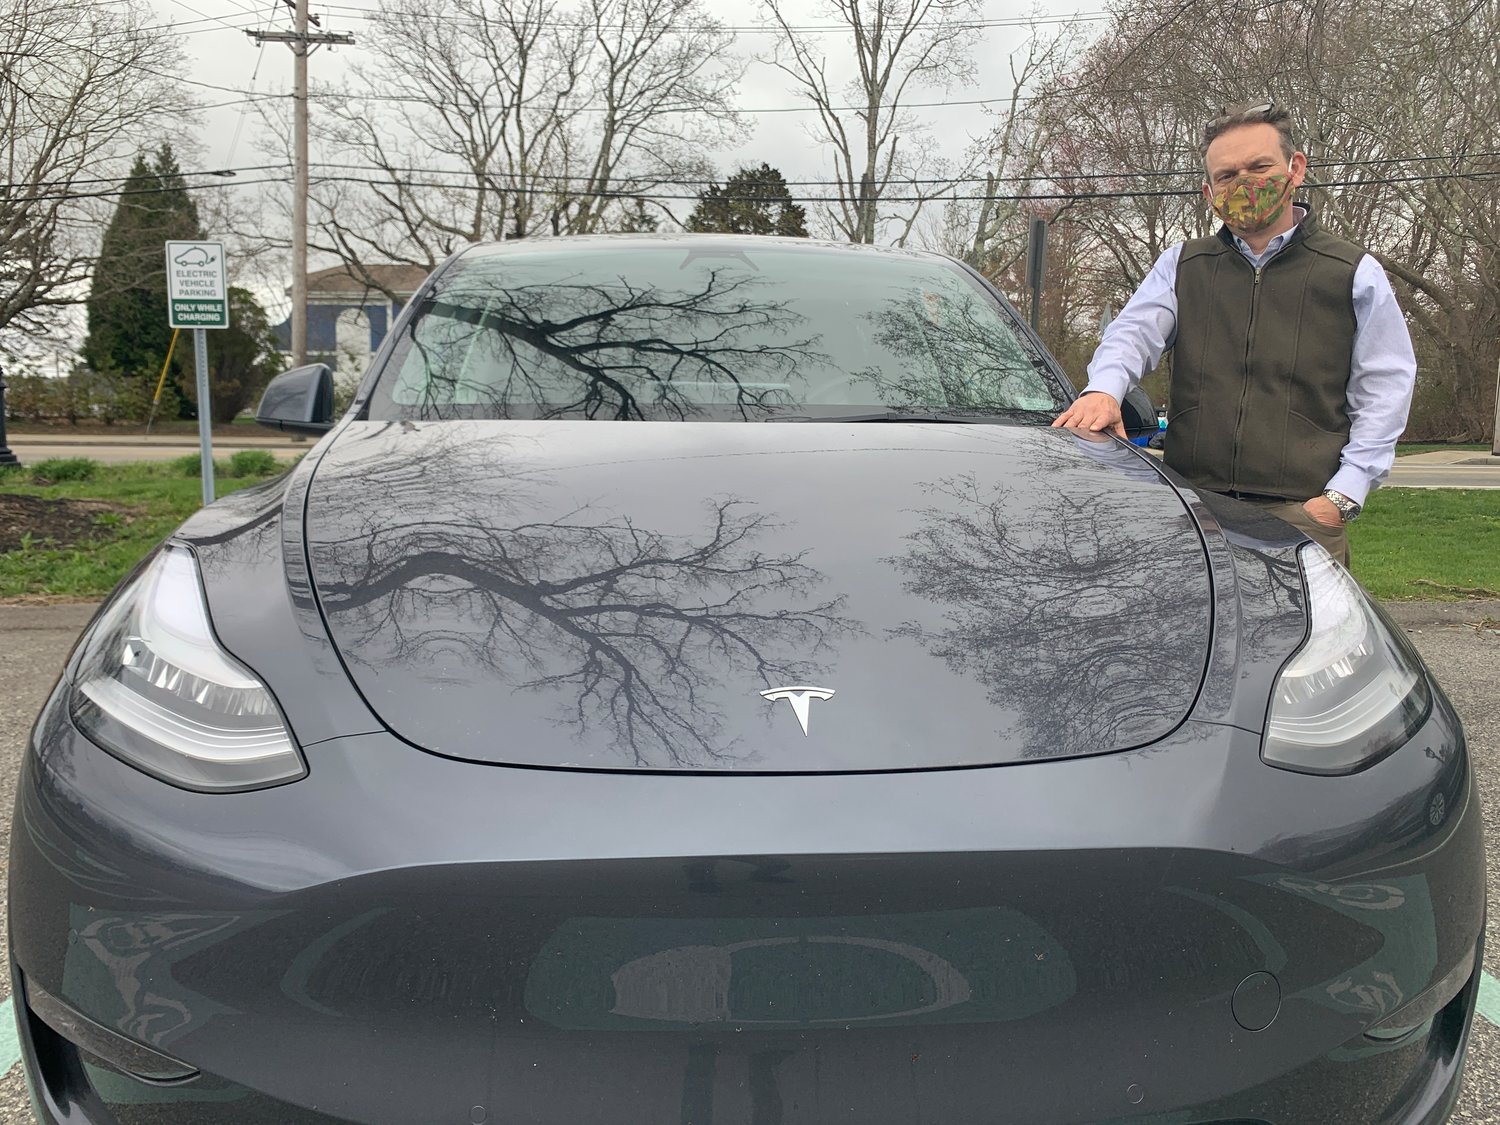 Barrington resident Magnus Thorsson stands next to his Tesla at Police Cove Park on Monday afternoon. Mr. Thorsson has submitted a proposal to the town, calling for the police department to use Teslas, an electric vehicle, instead of gas-powered vehicles.